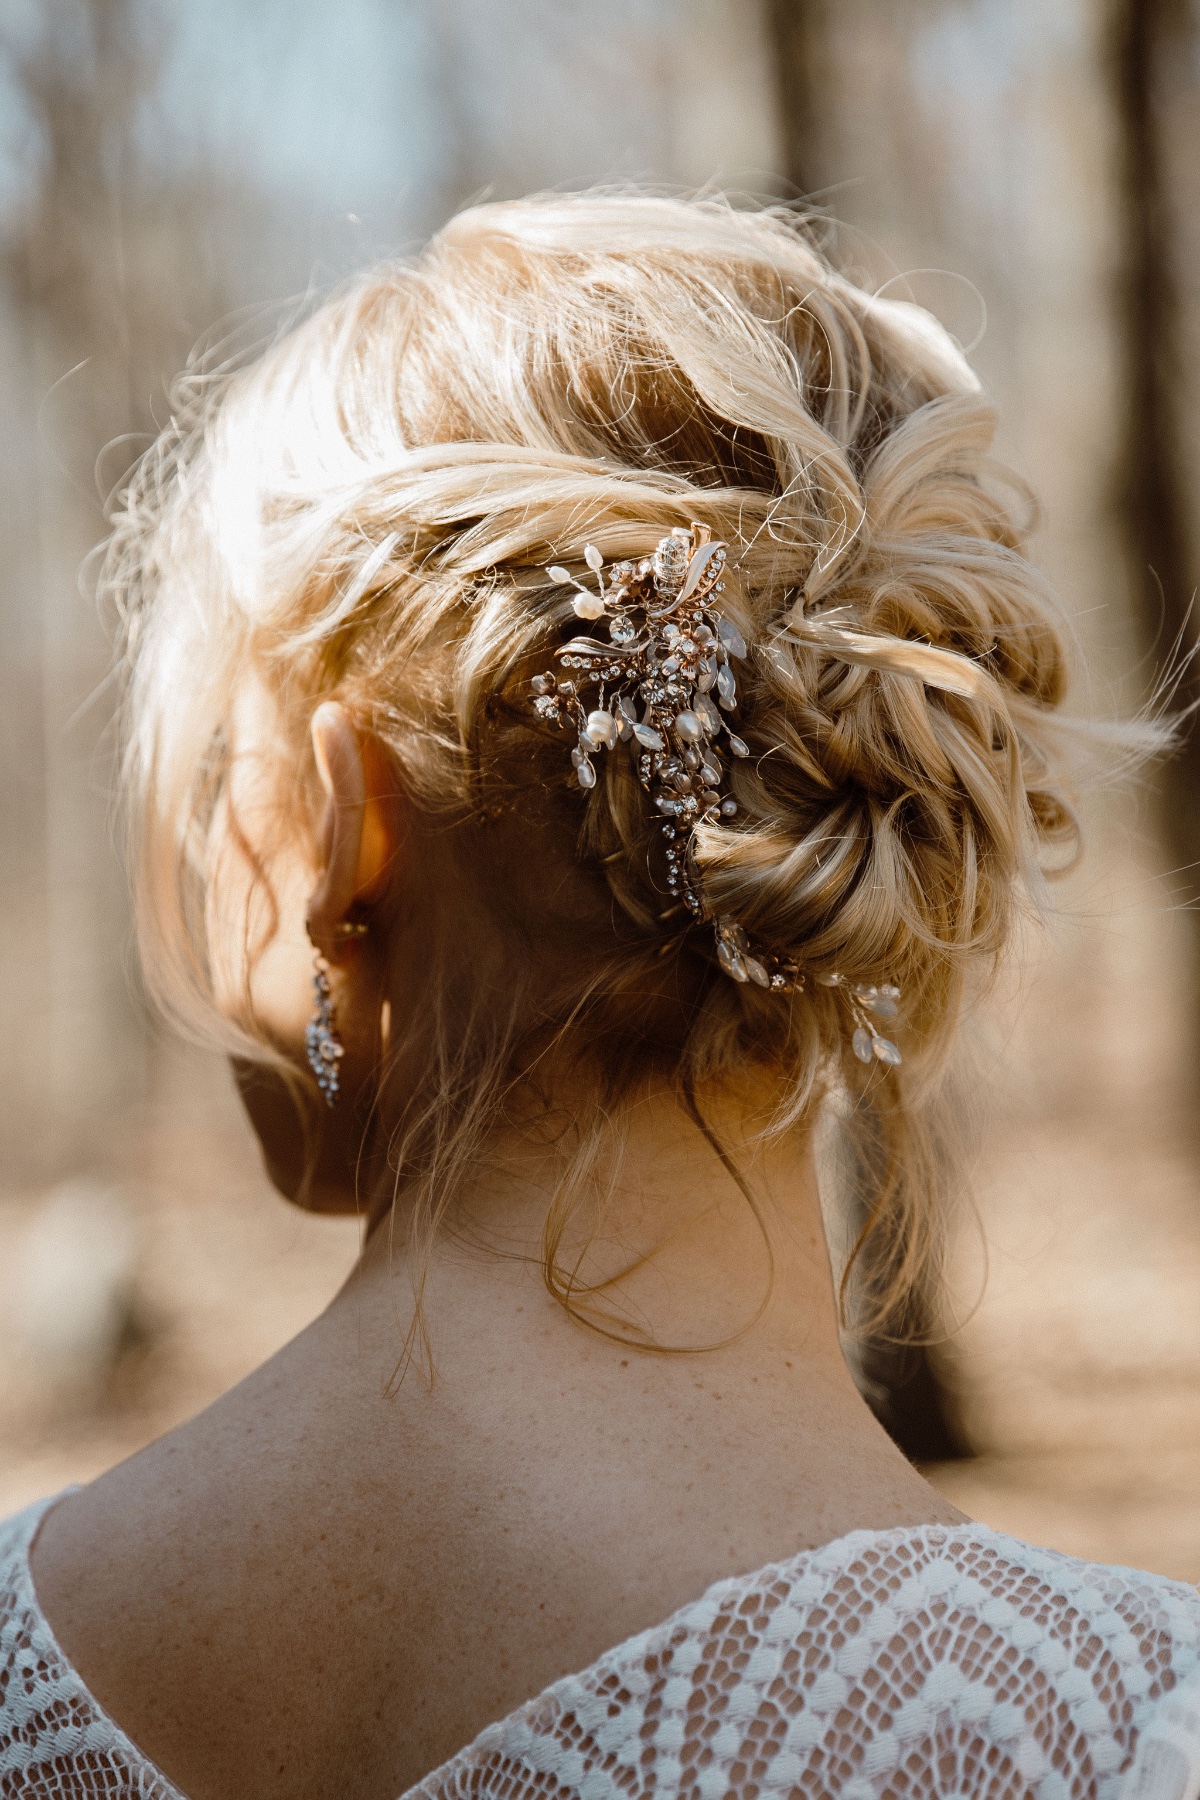 gorgeous back details and messy updo